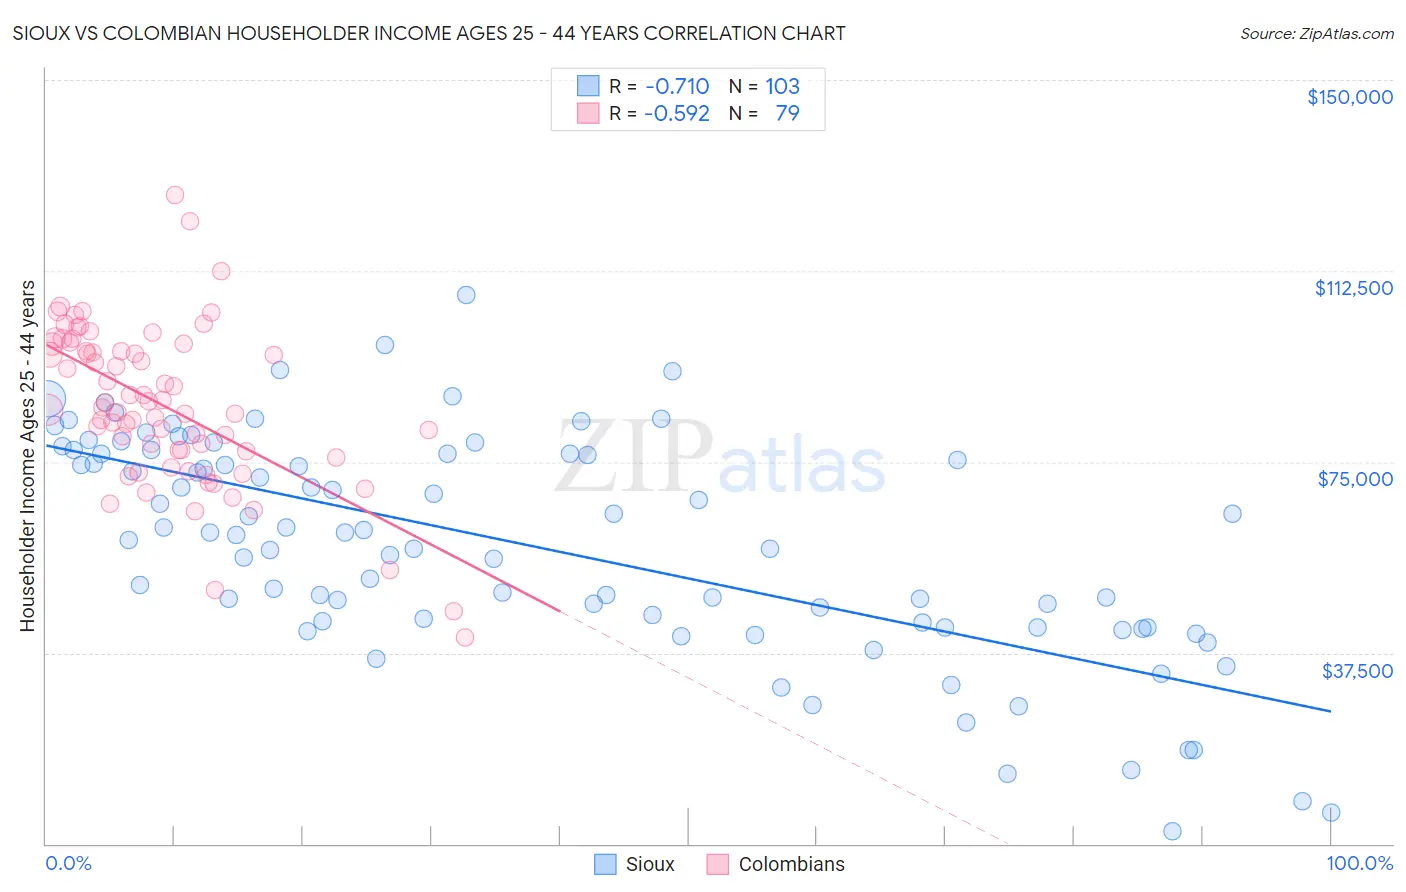 Sioux vs Colombian Householder Income Ages 25 - 44 years